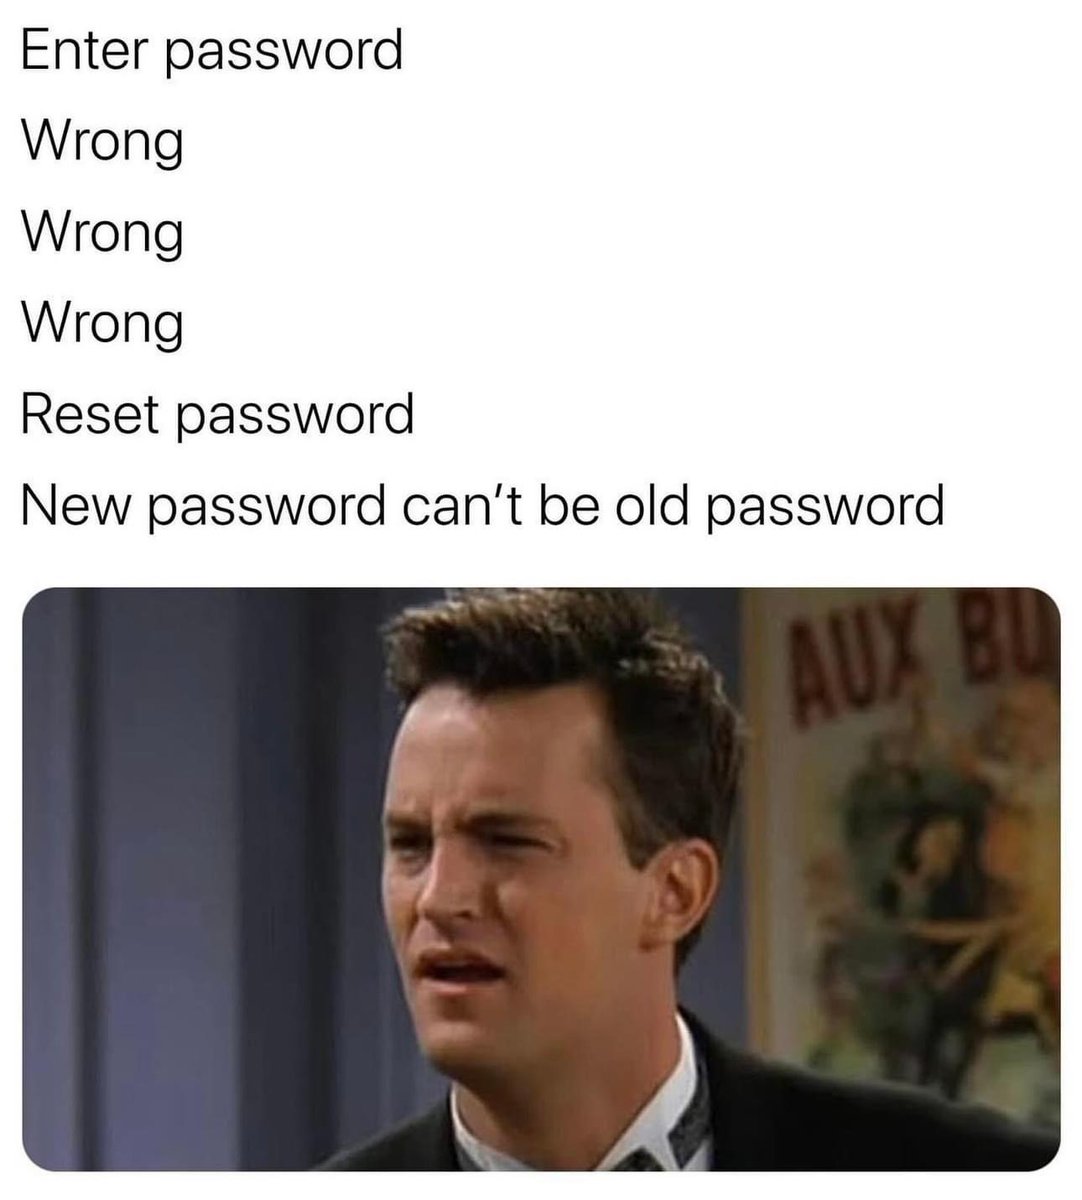 🤯 This happens every time! 🙈😂
#sap #sapsecurity #sapmemes #fridayfun